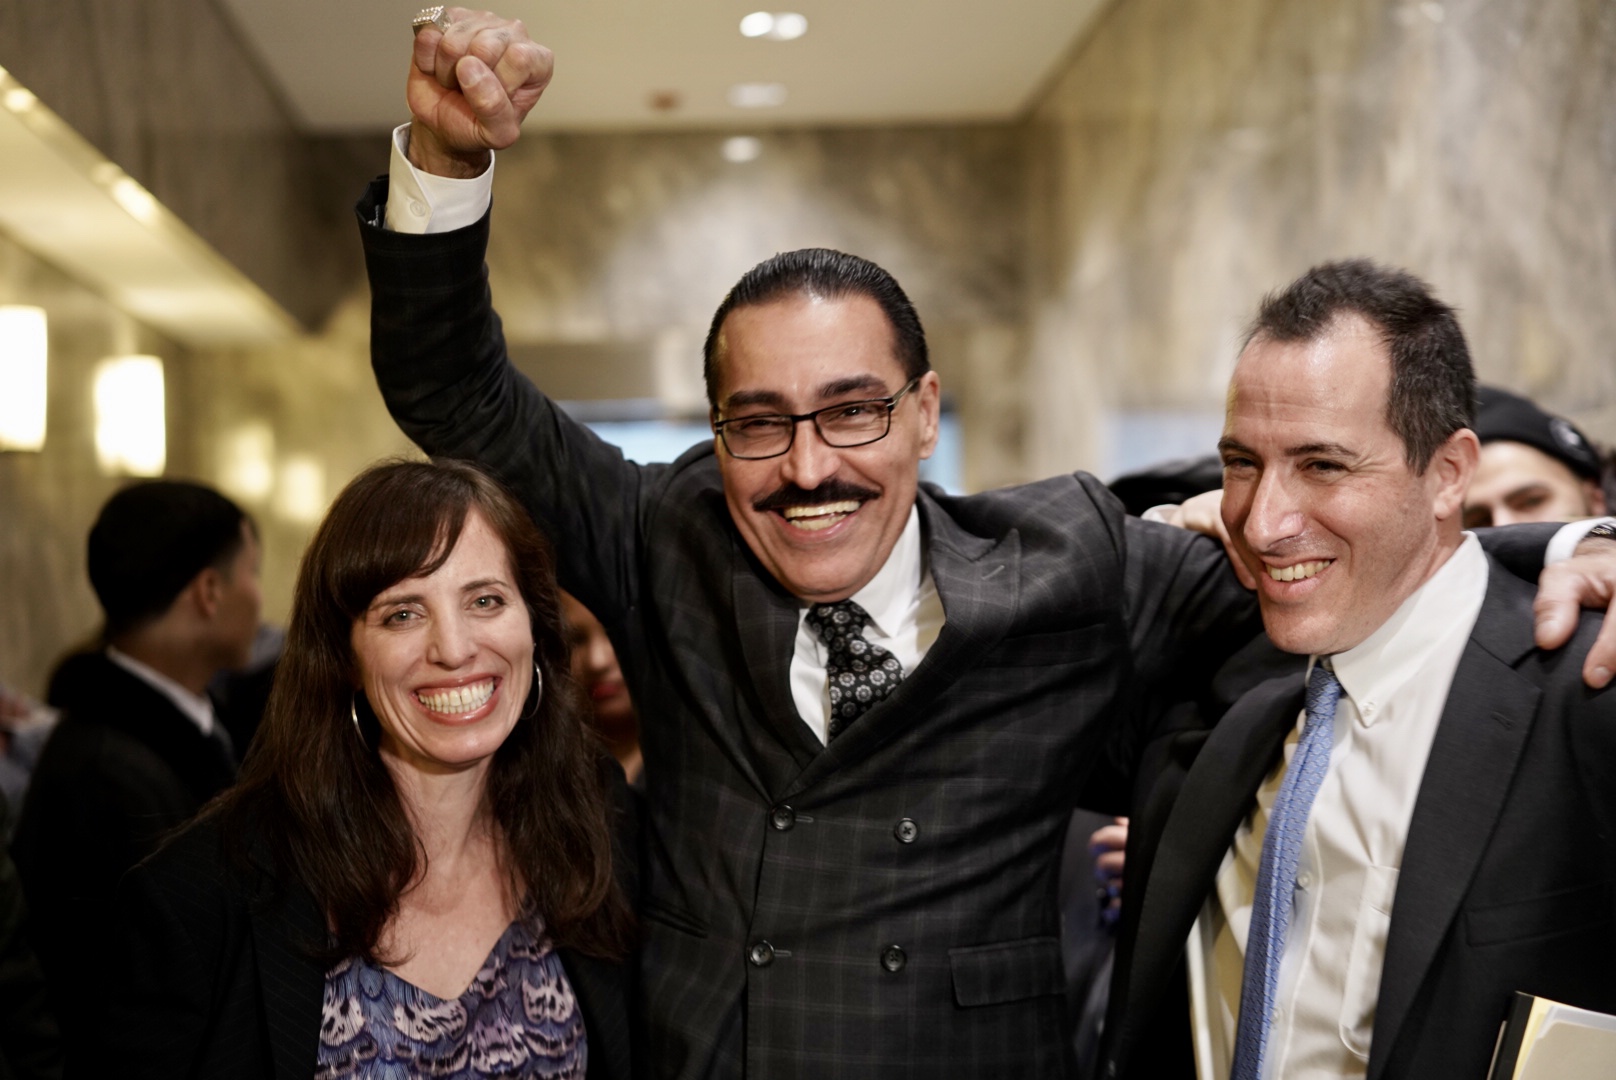 Felipe Rodriguez (center) after his hearing with his attorneys Nina Morrison, senior litigation counsel at the Innocence Project, (left), and Zachary Margulis-Ohnuma (right), at the Queens County Supreme Court on Dec. 30. Credit: Sameer Abdel-Khalek for the Innocence Project.